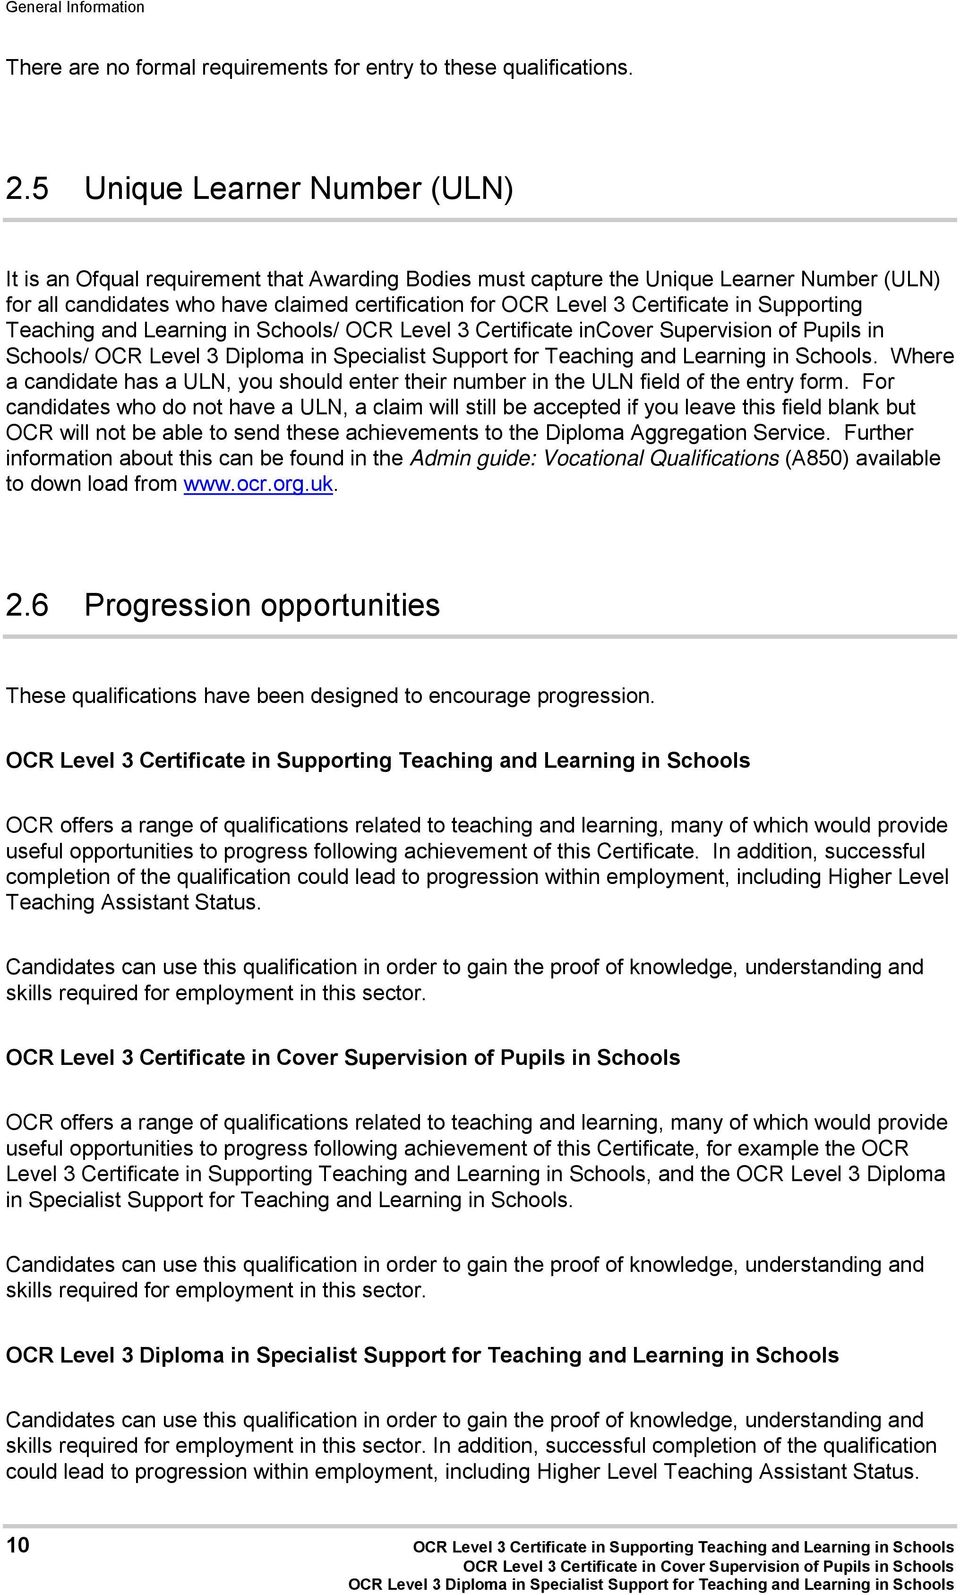 Certificate in Supporting Teaching and Learning in Schools/ OCR Level 3 Certificate incover Supervision of Pupils in Schools/.